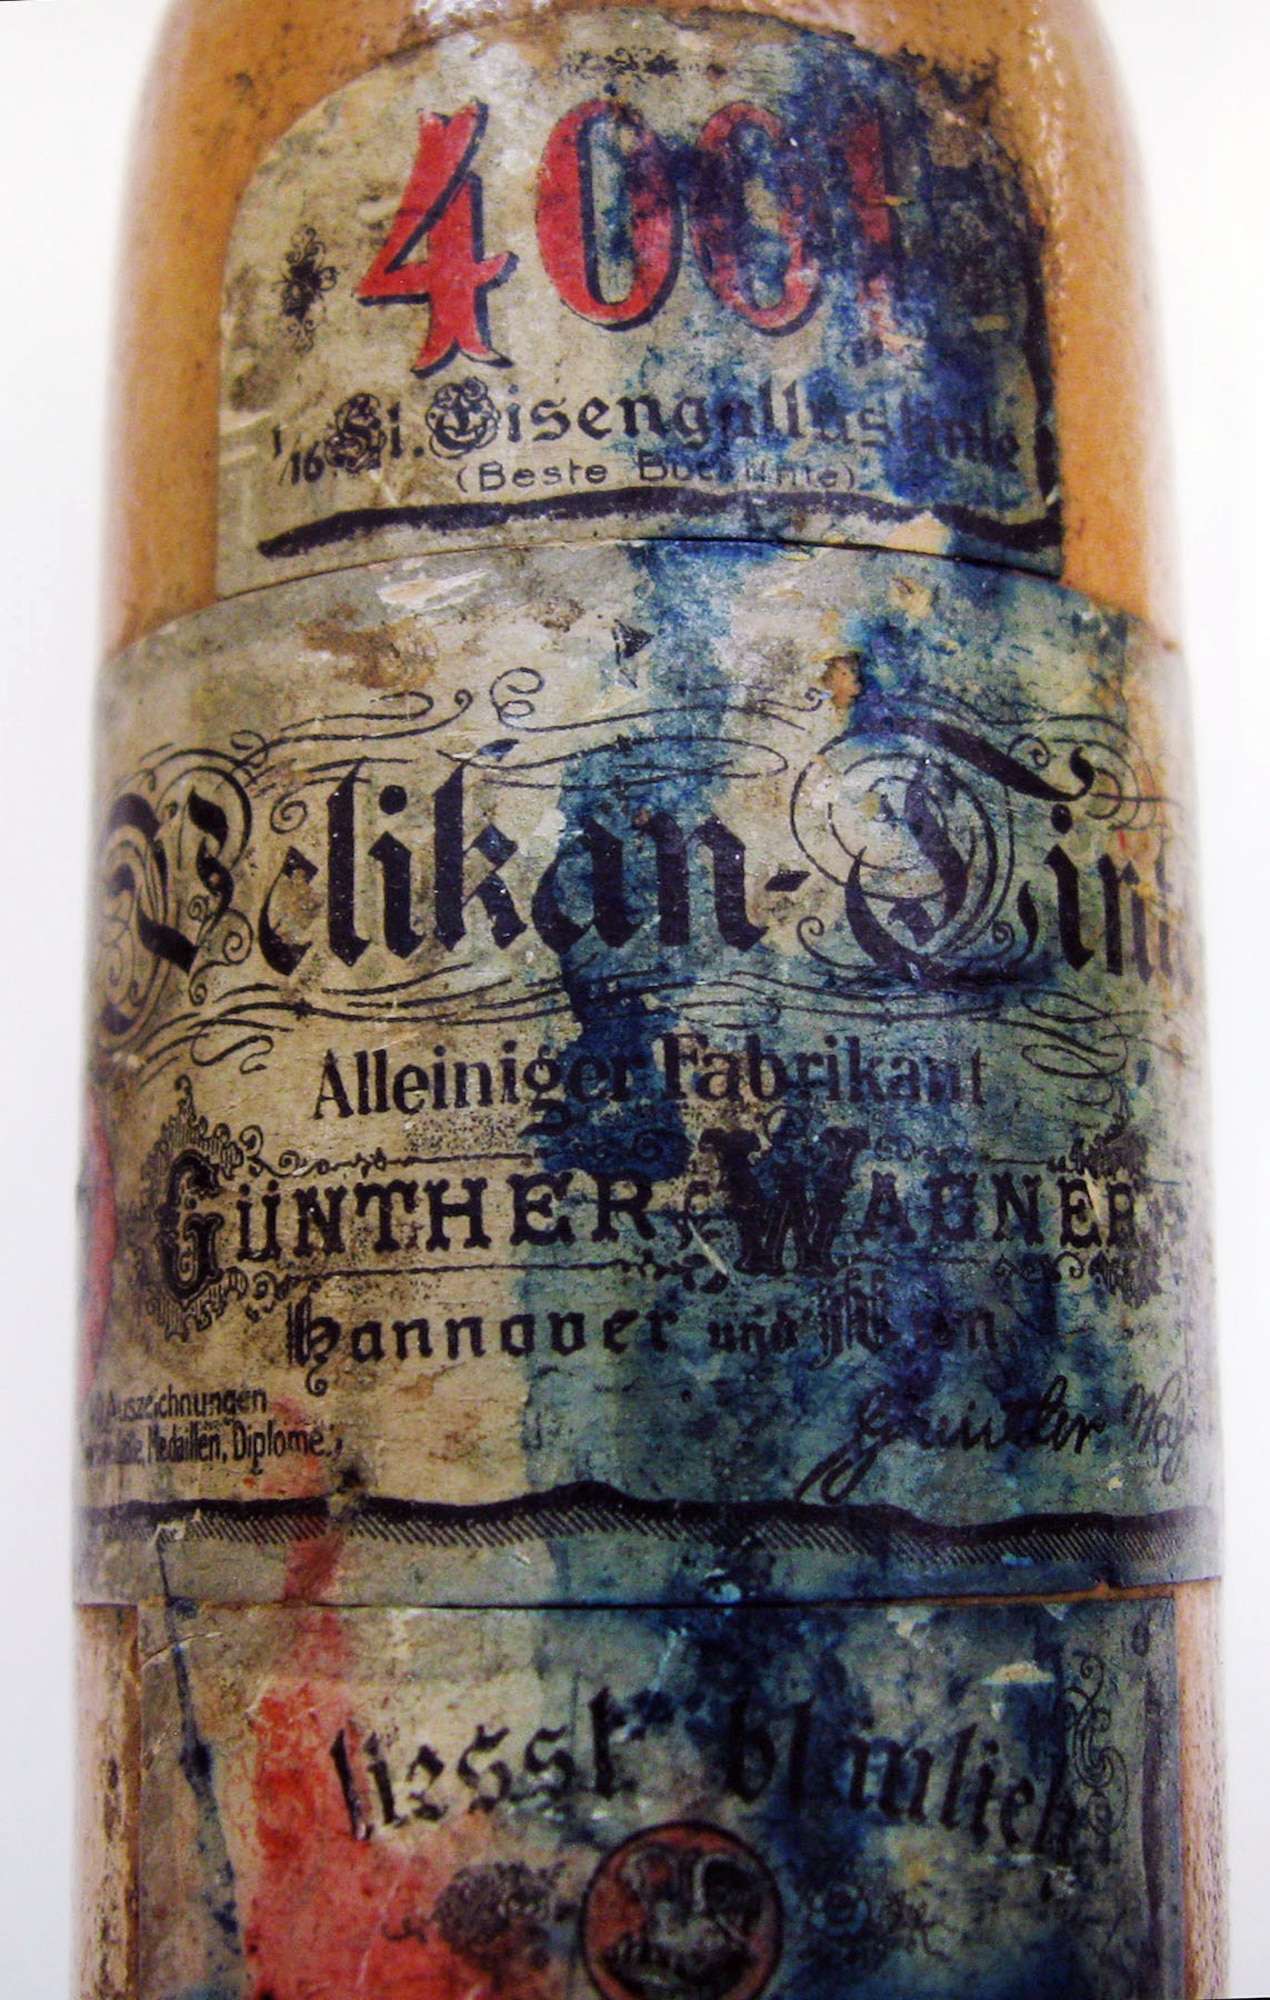 This is a clay ink bottle that once contained blue 4001 ink produced by Pelikan. Around the time of World War I, blue 4001 was the most popular ink color sold by Pelikan. (U.S. Air Force photo)